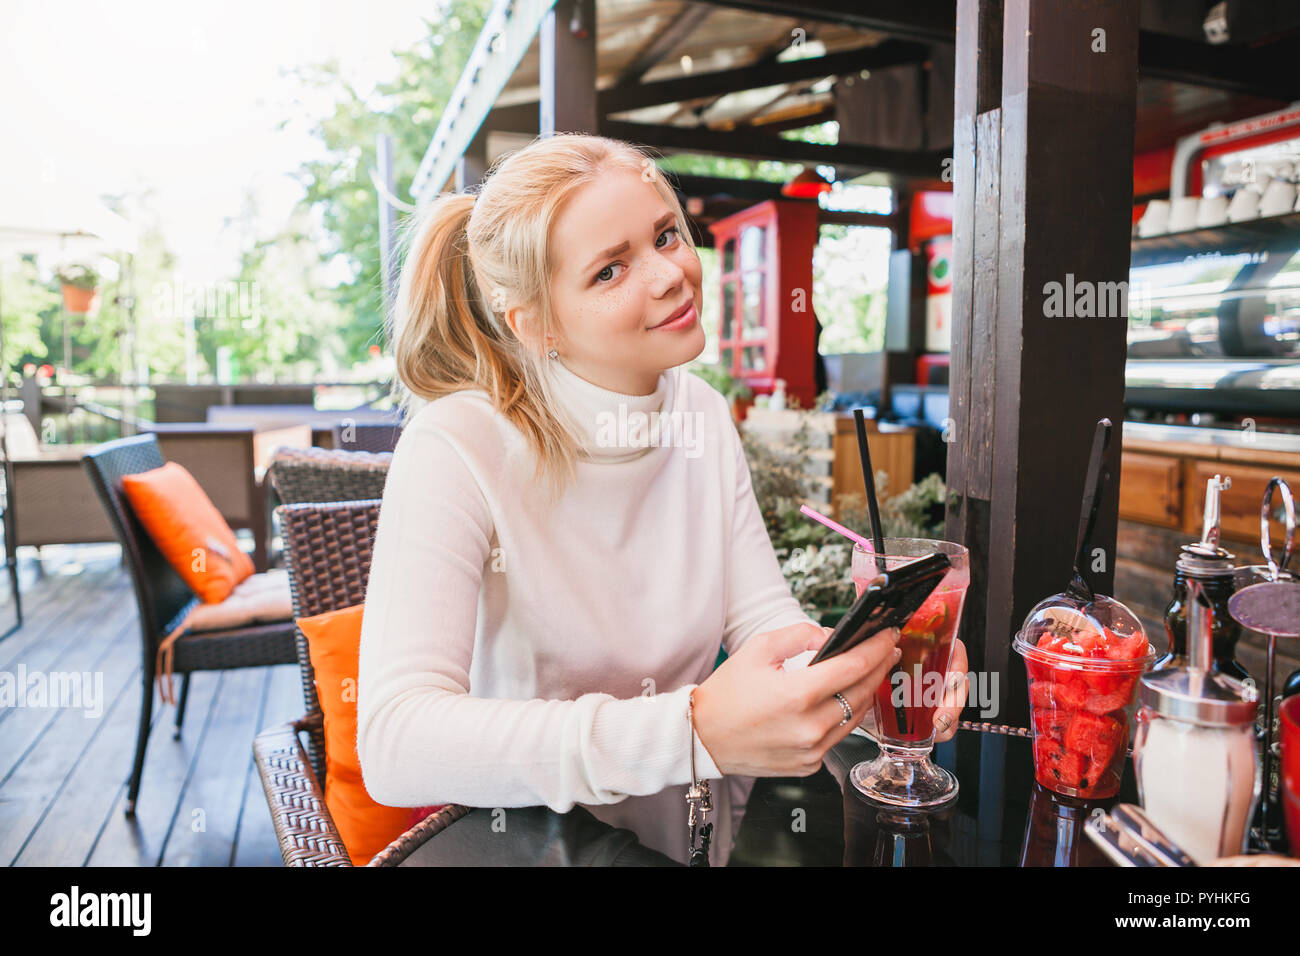 young girl with freckles texting message on her smartphone while drinking coctail with berries and mint in the outdoor restaurant Stock Photo